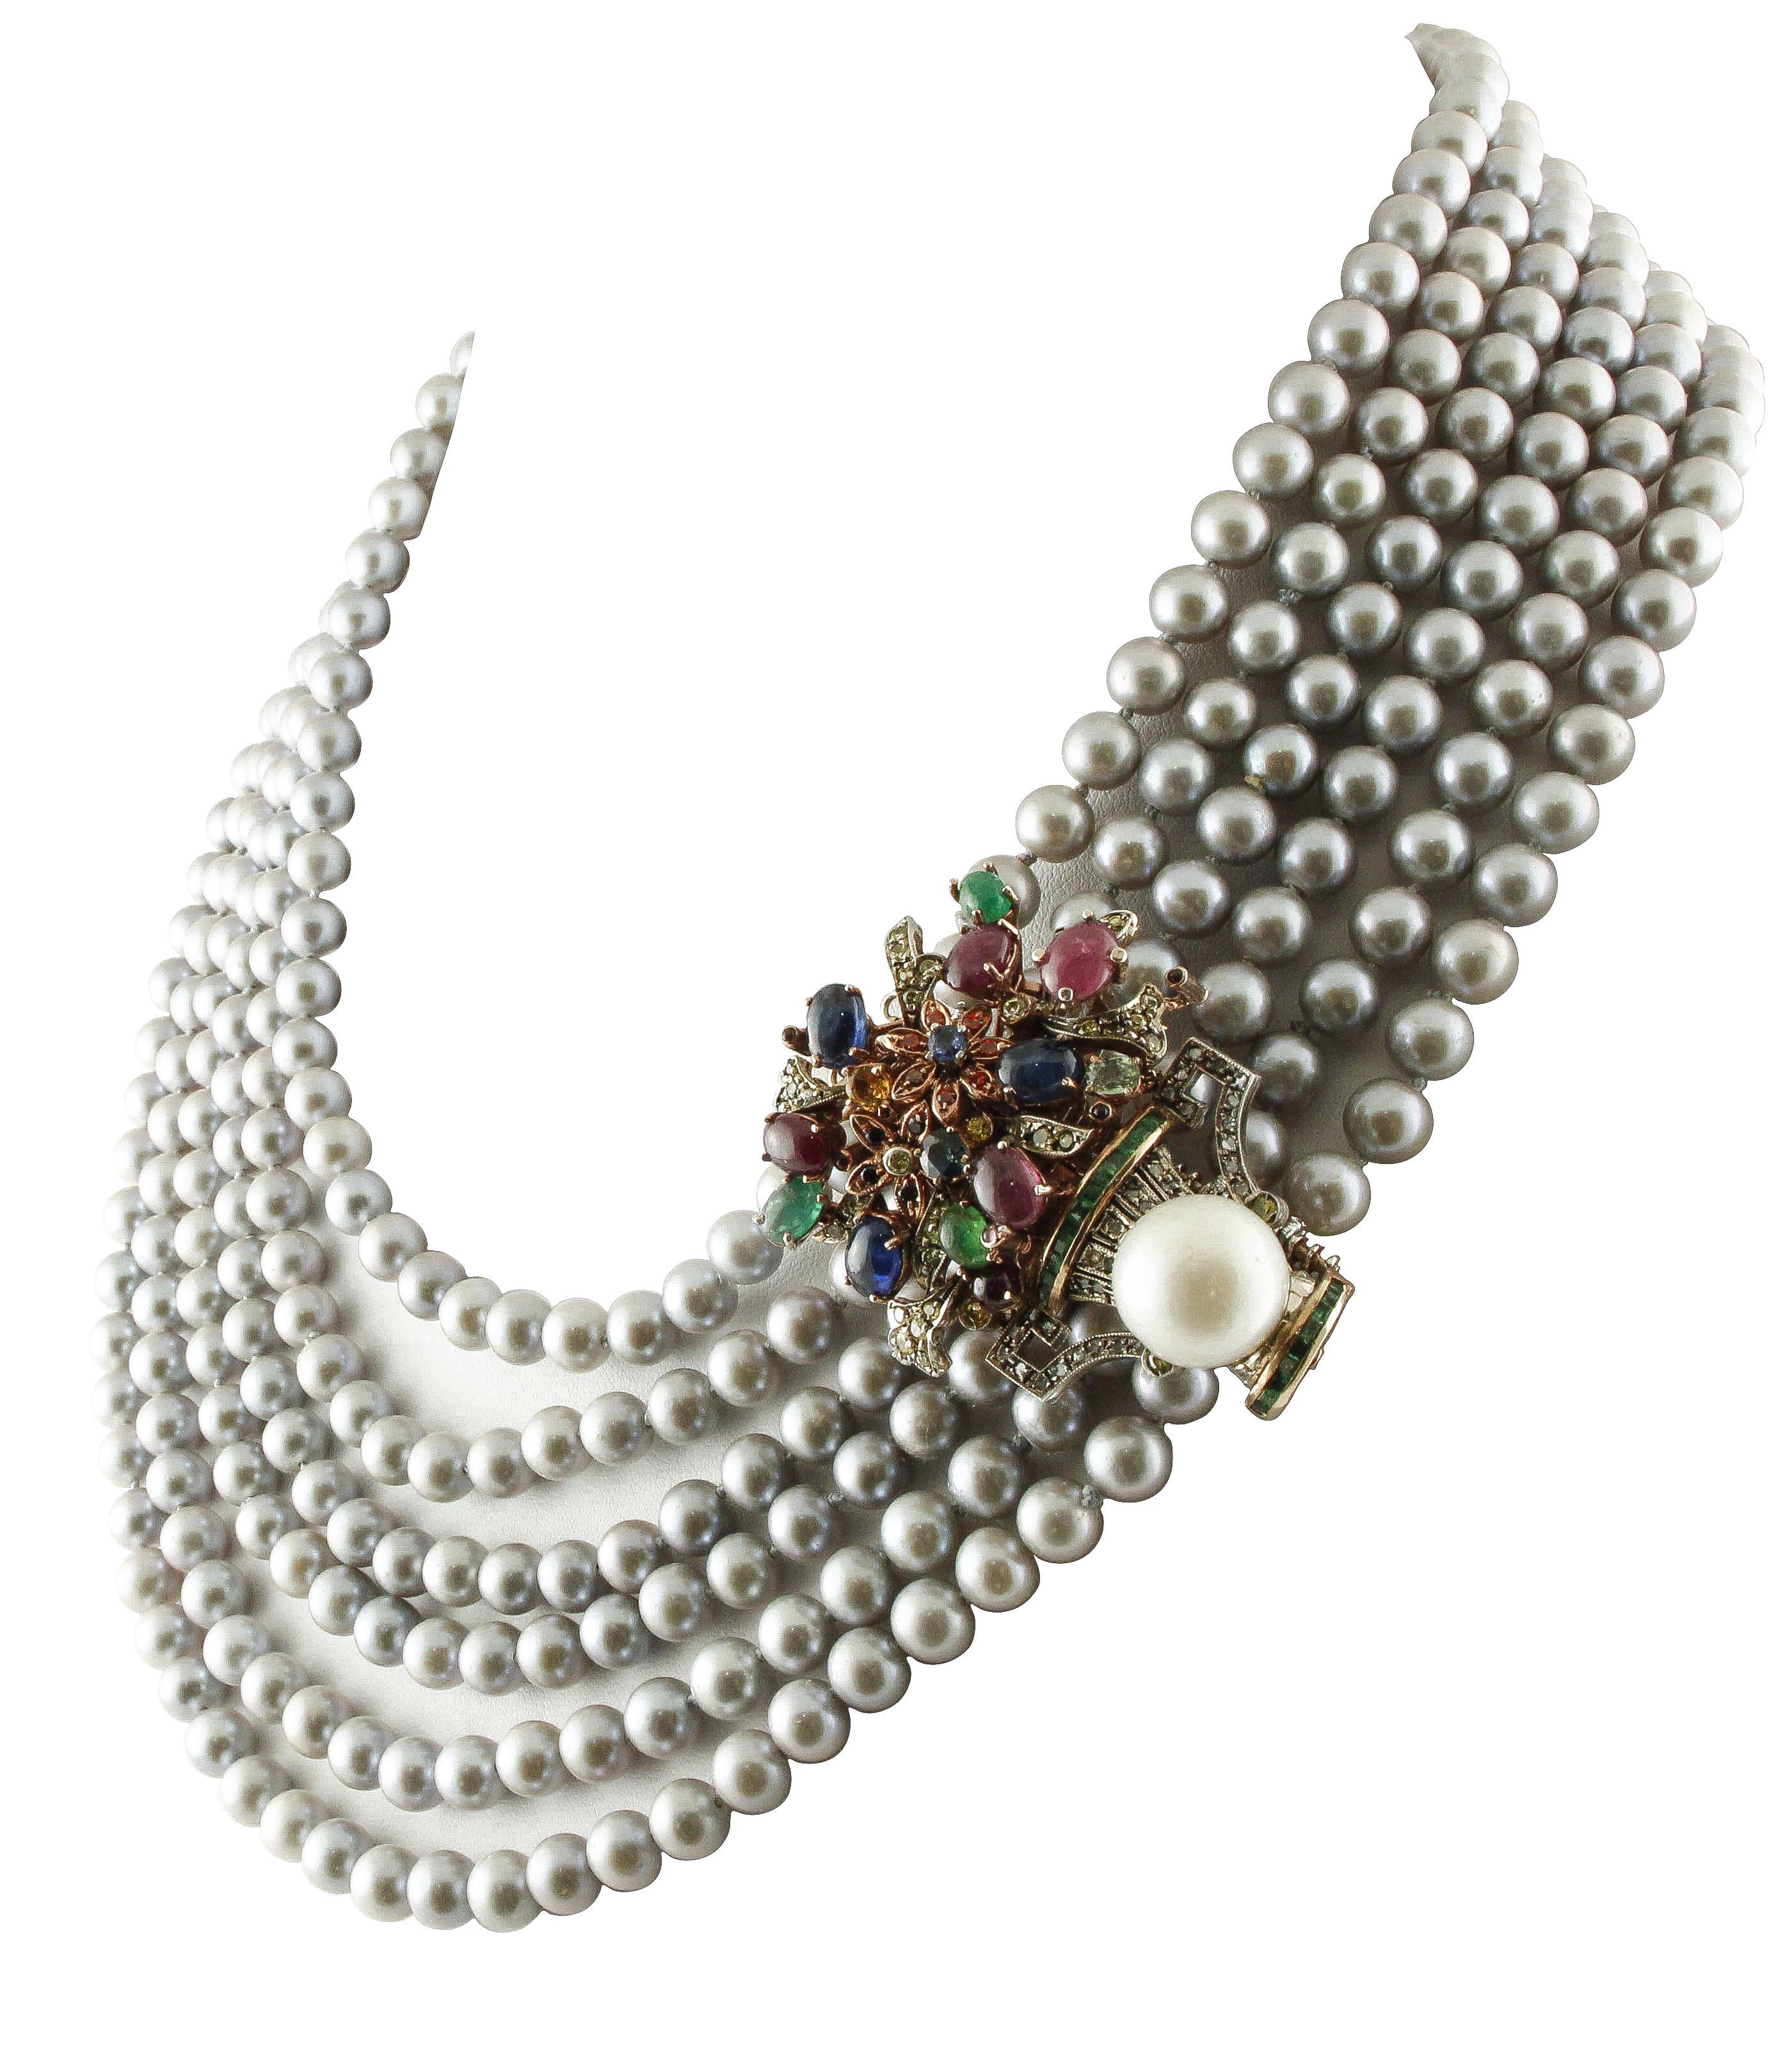 Amazing Multi-strand, beaded necklace composed by six grey pearl rows and flowerpot shape clasp in 9K rose gold and silver, embellished by leaves and flowers detailes and studded by 0.19 ct of diamonds, 10.82 ct of rubies, emeralds, blue, yellow and